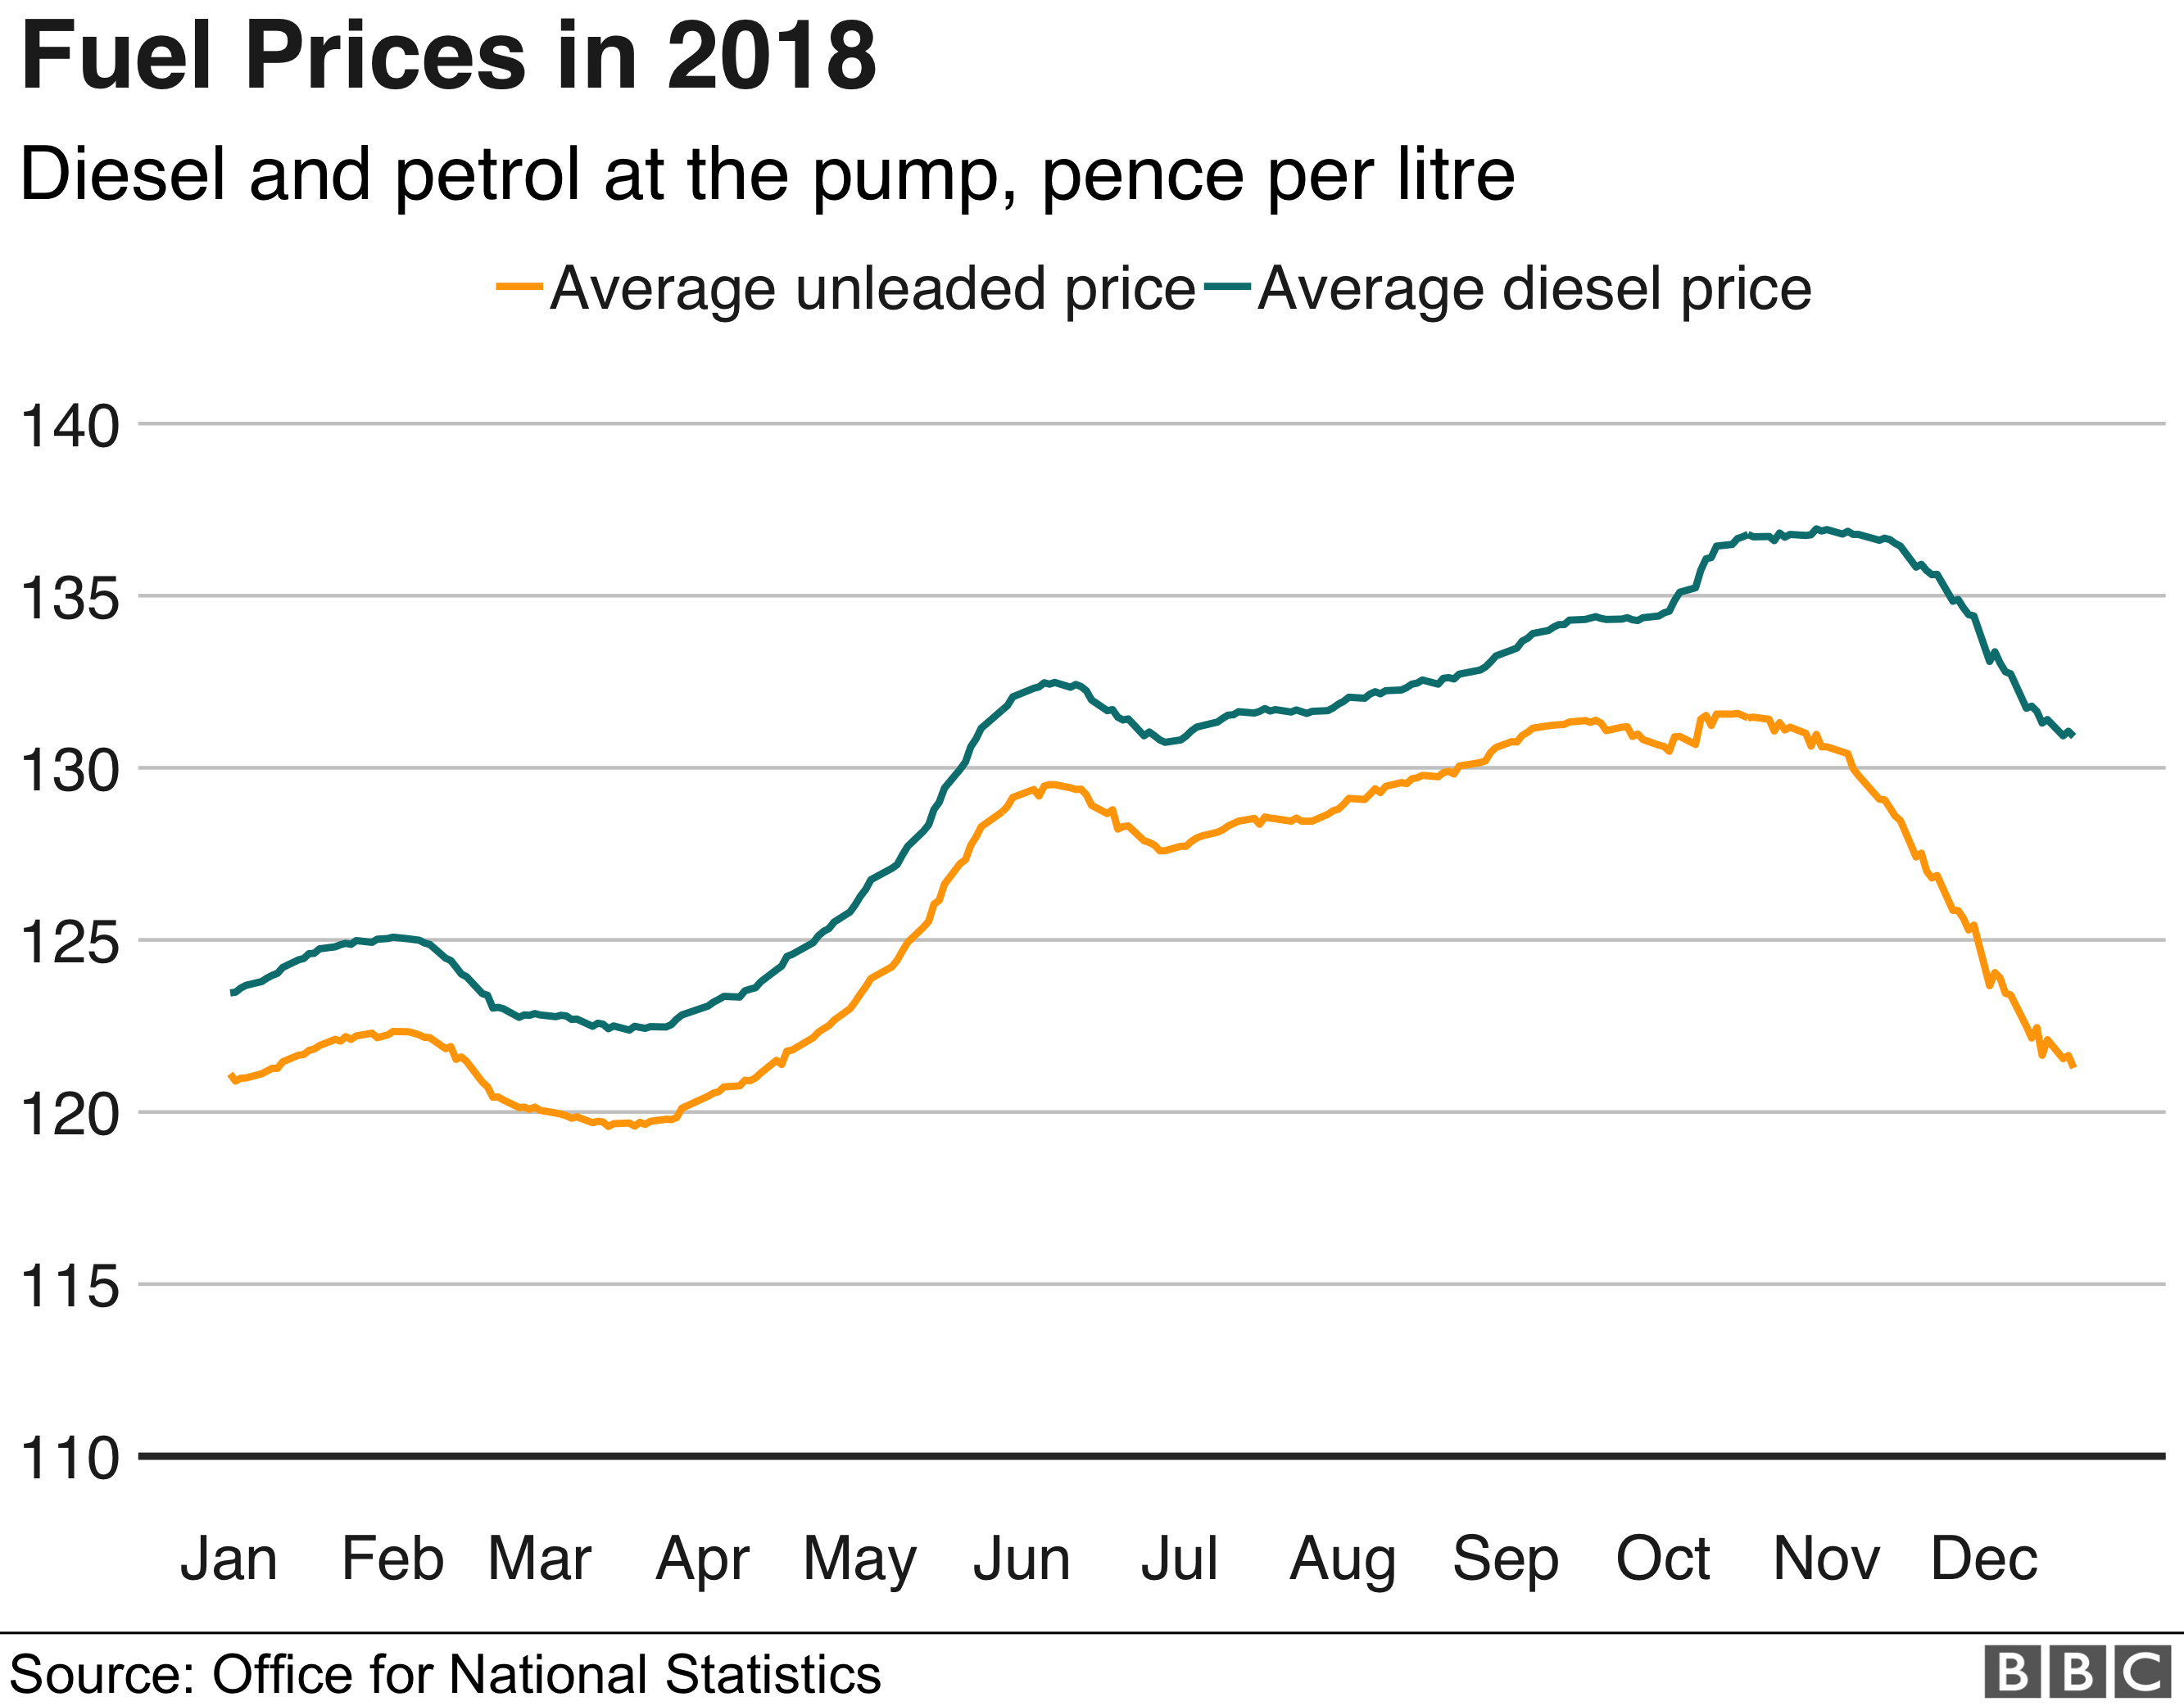 Fuel Prices in 2018